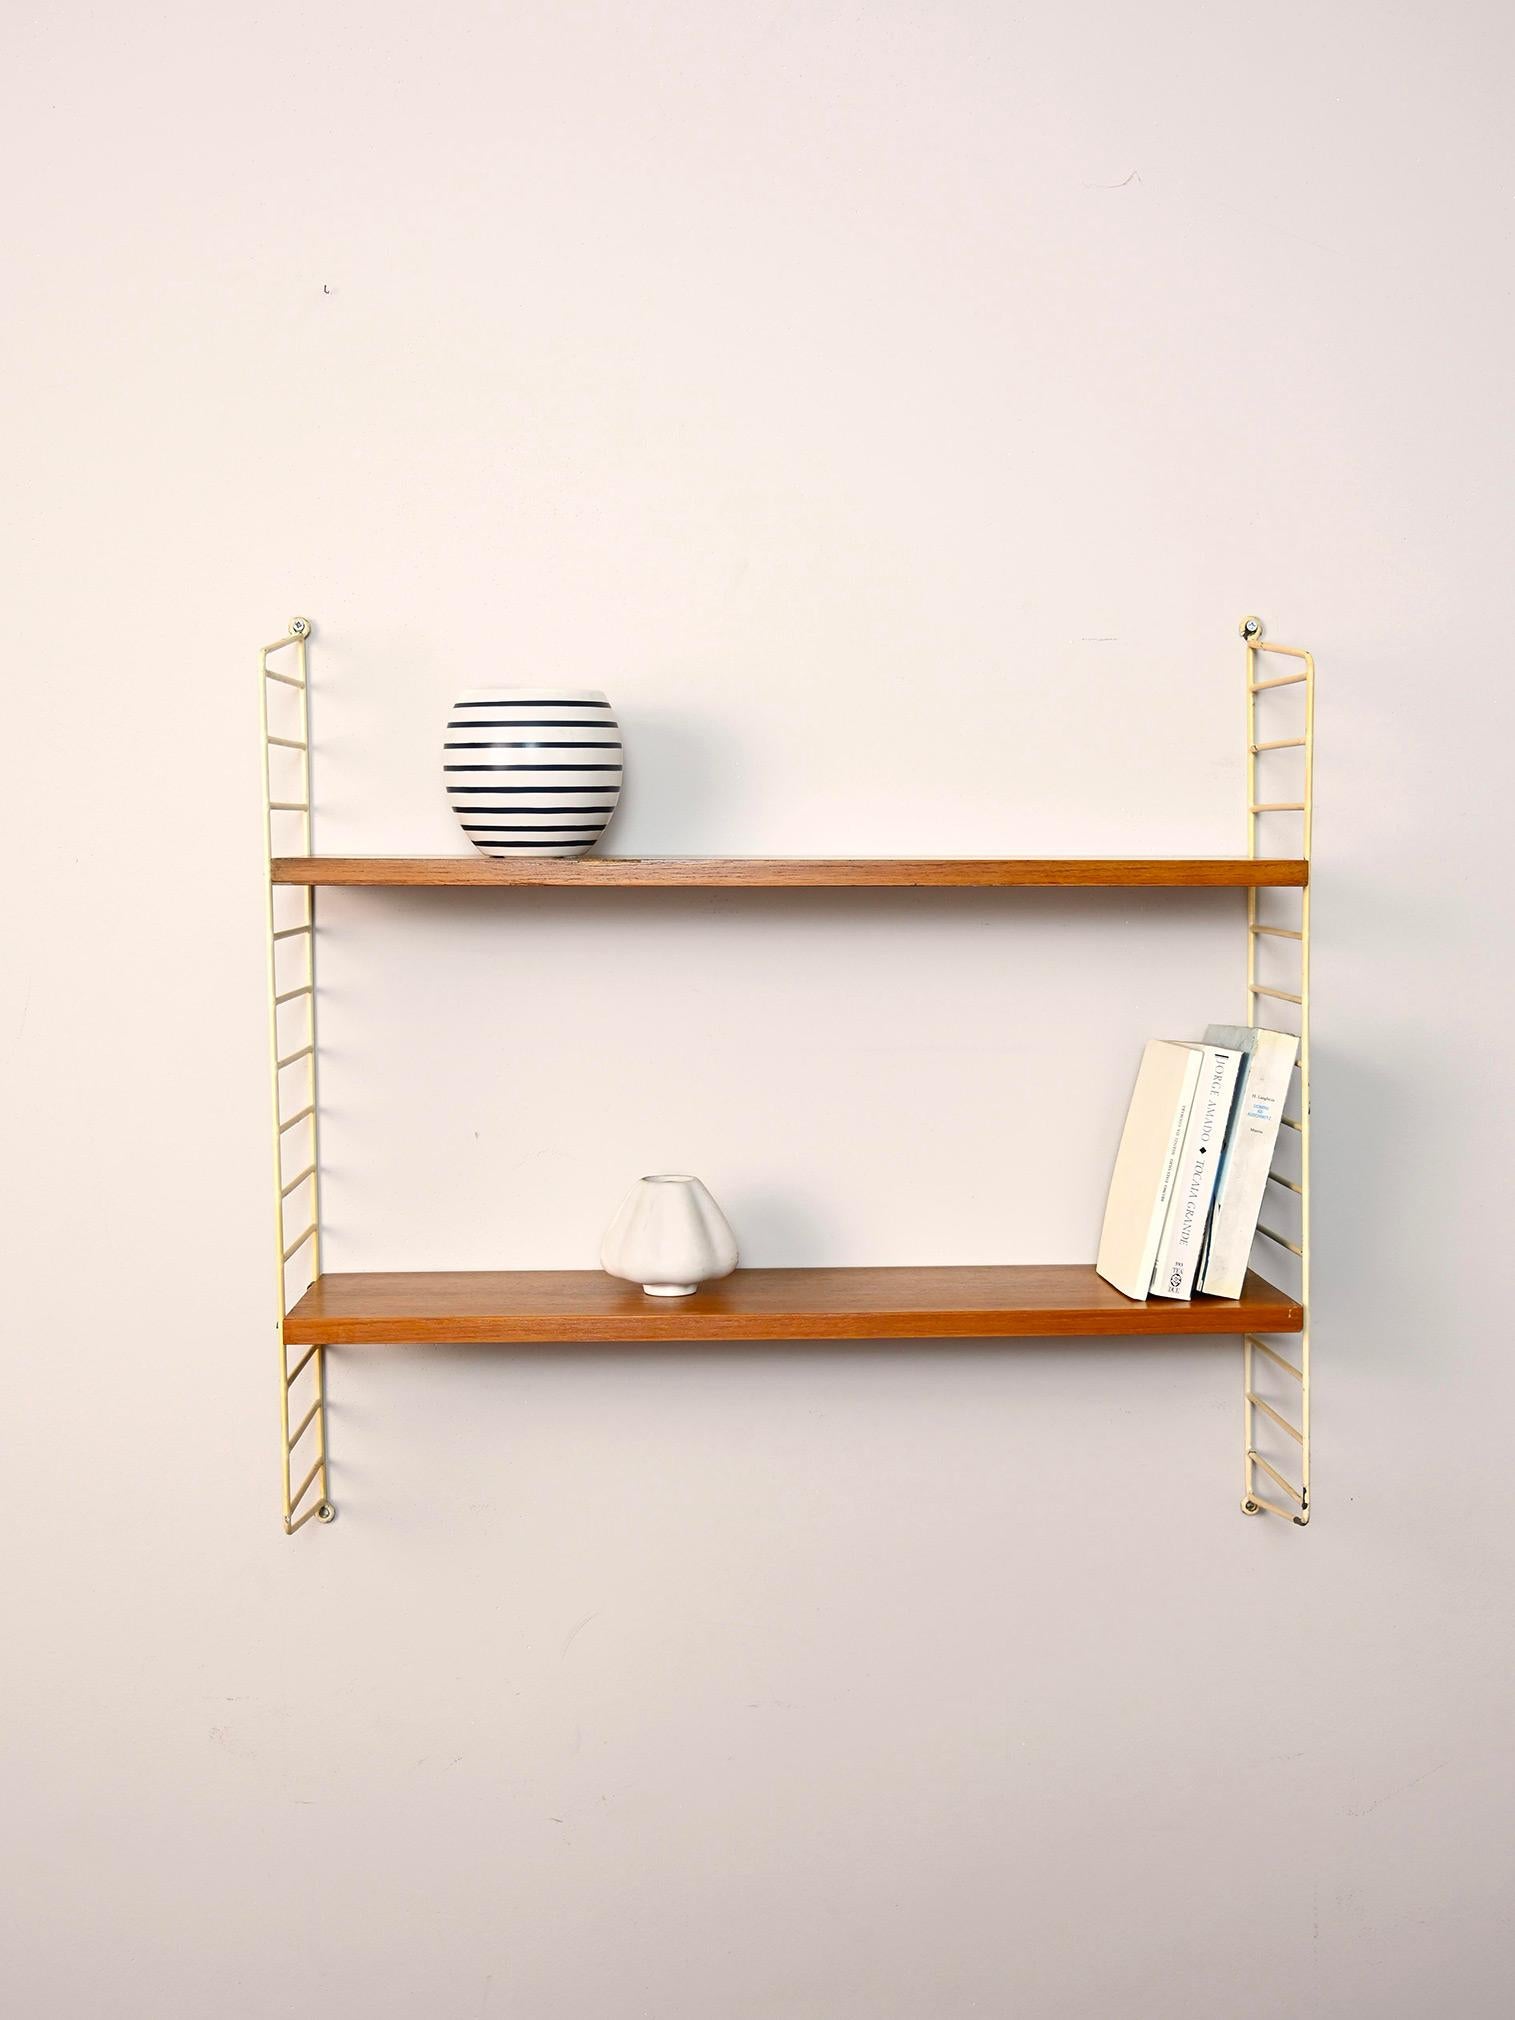 Original Scandinavian shelves from the 1960s.

This simple shelving system consists of a coated metal side frame to which two teak shelves fit.
Simple and functional it can be hung in different rooms of the house.

Good condition. It has been